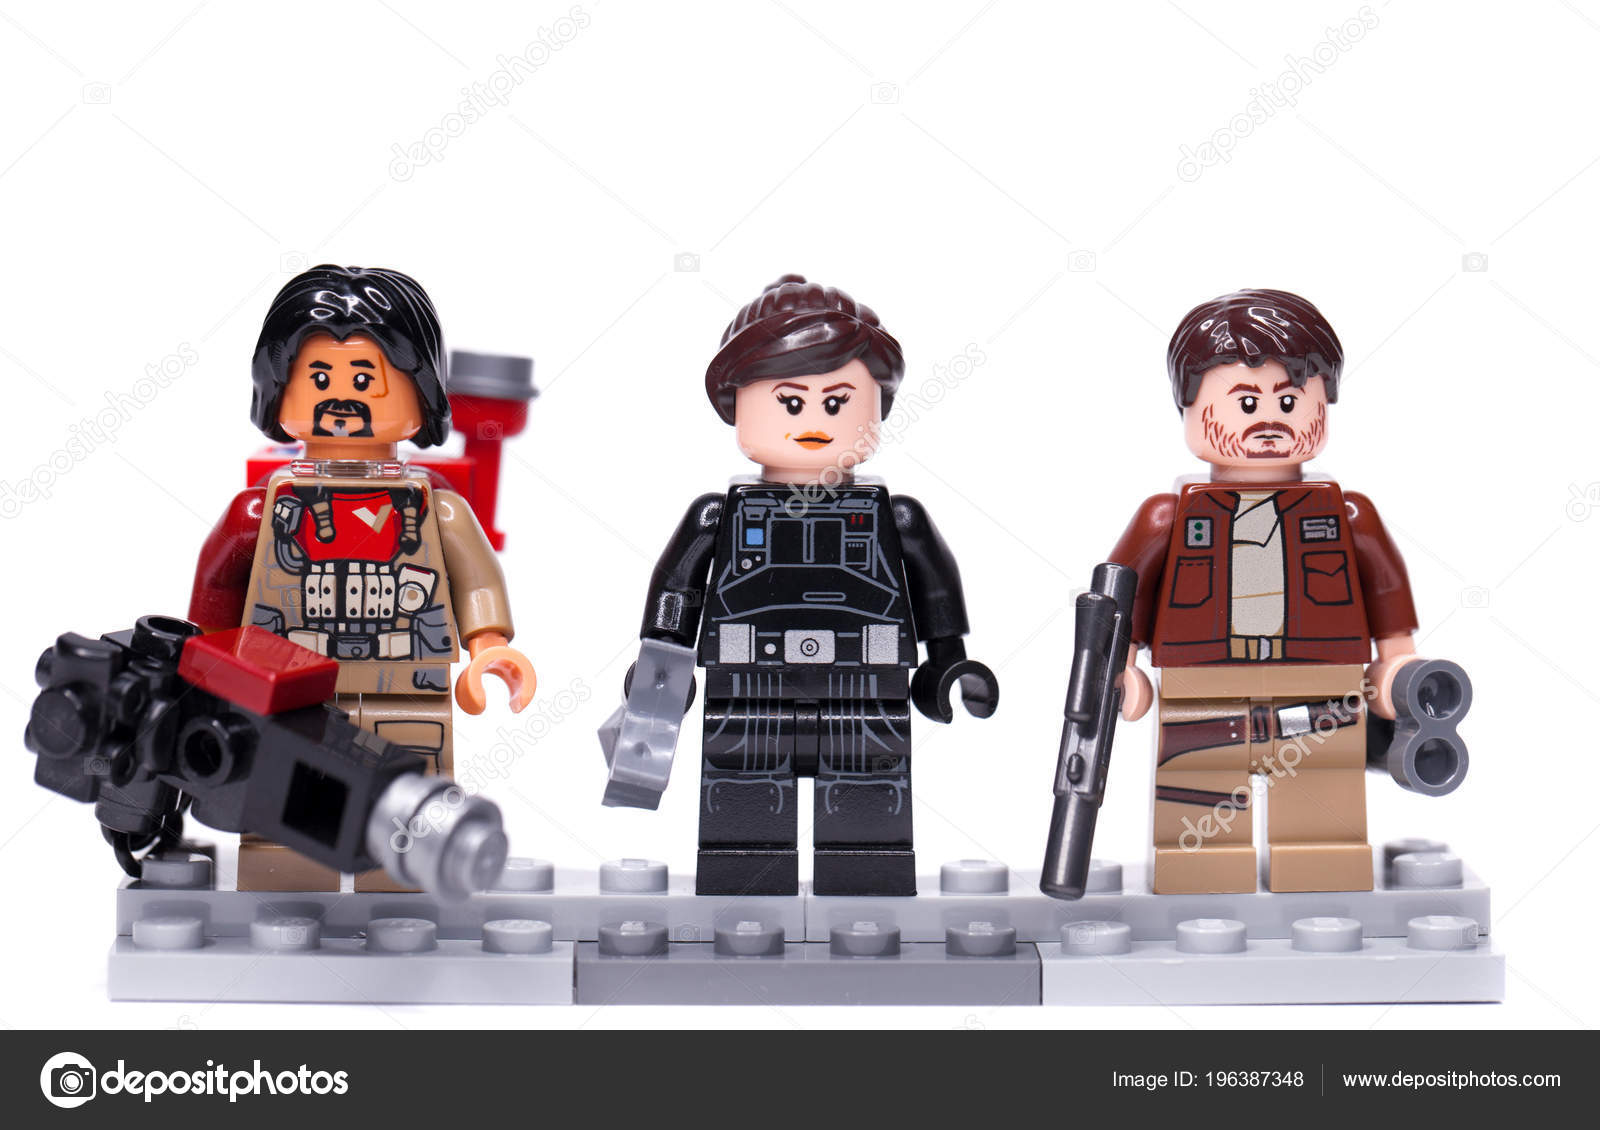 industri dragt Anerkendelse Russia April 2018 Constructor Lego Star Wars Main Characters Film – Stock  Editorial Photo © arkusha #196387348